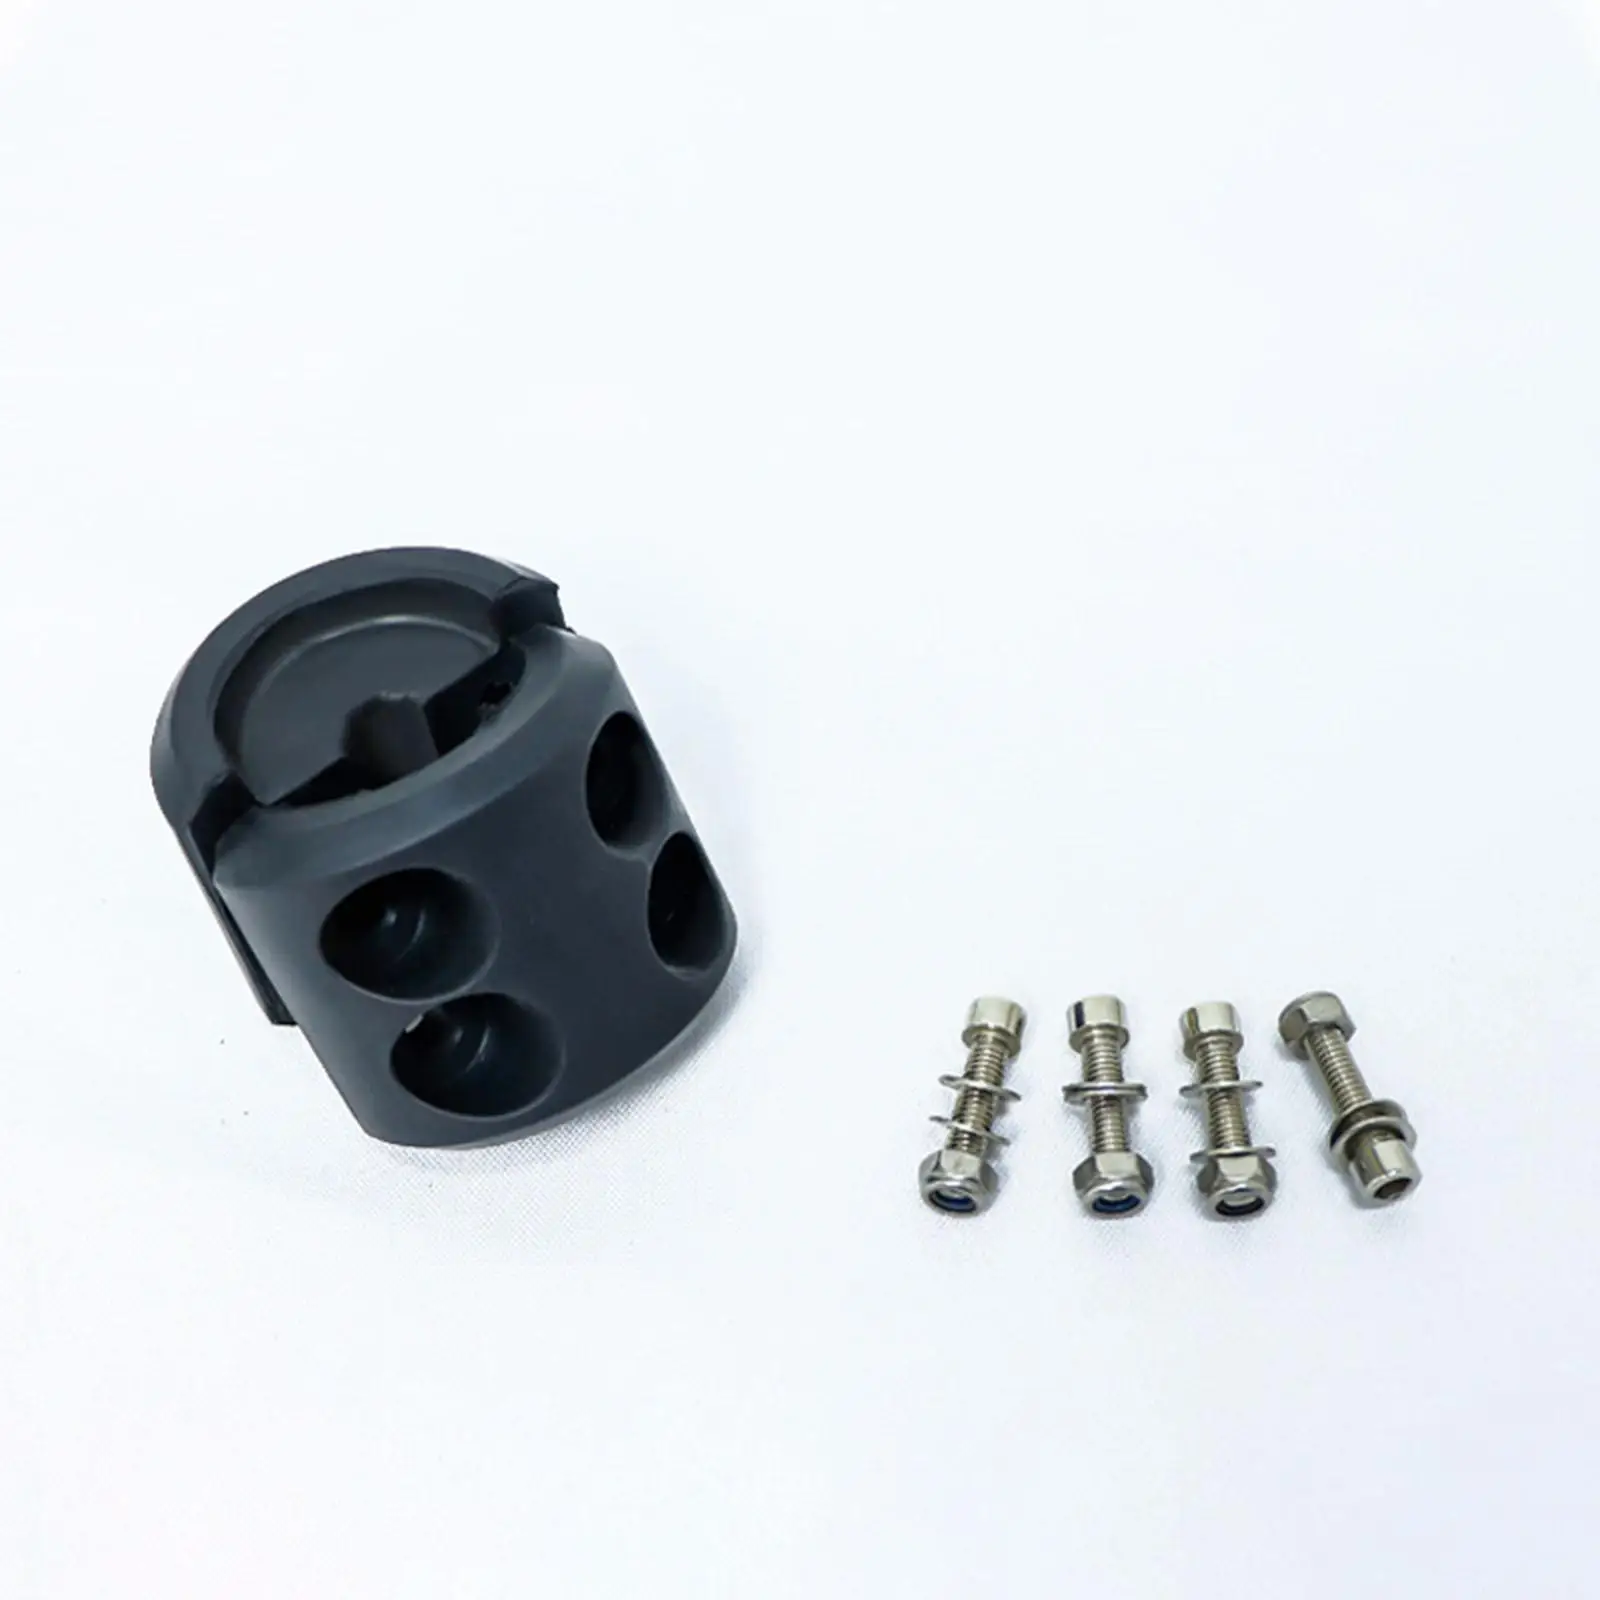 Heavy Duty Swing Pulley Accessories Compression Spring with Screws Rubber Buffer Upgrade for Swinging Chair Outdoor Swing